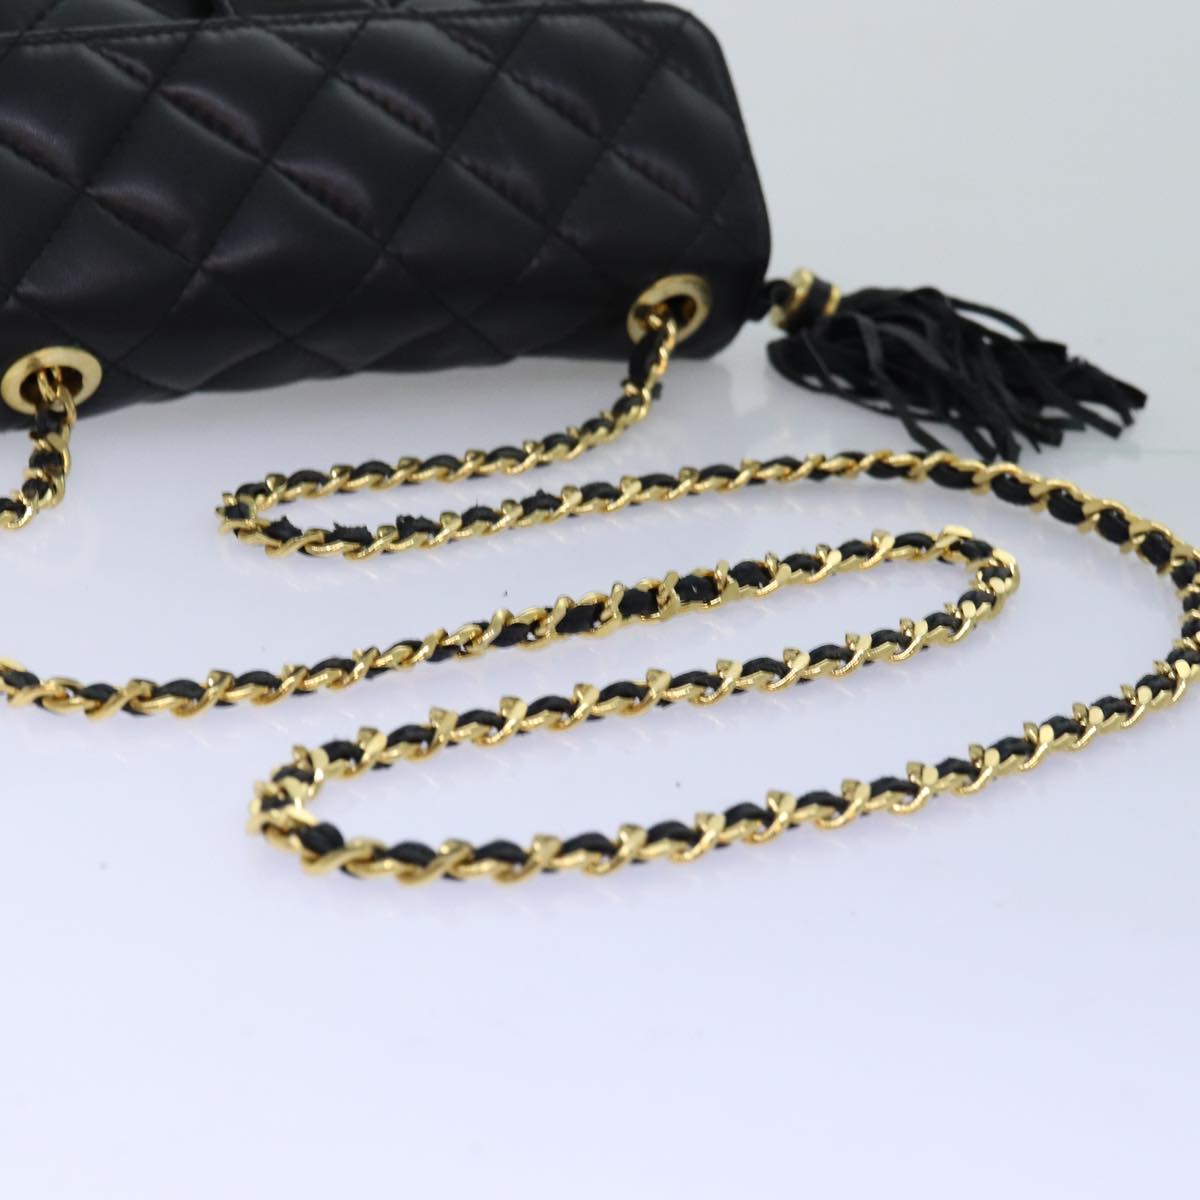 GIVENCHY Quilted Chain Shoulder Bag Leather Black Auth yk12643